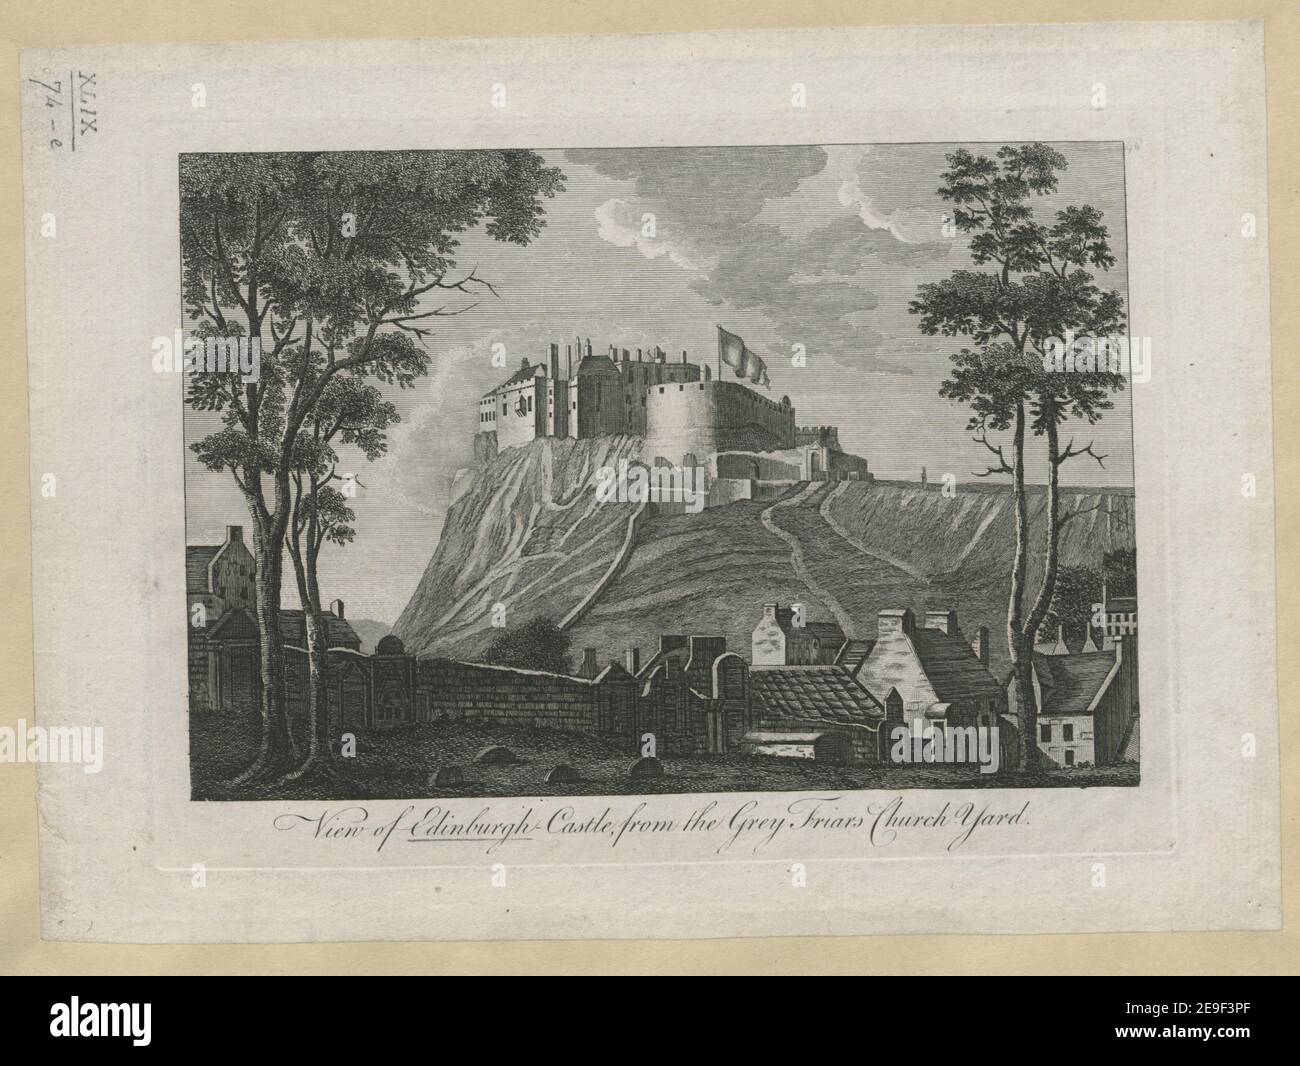 View of Edinburgh Castle from the Grey Friars Church Yard. Author  Kearsley, George 49.74.e. Place of publication: [London] Publisher: [George Kearsly] Date of publication: [1778]  Item type: 1 print Medium: ethcing and engraving Dimensions: platemark 15.7 x 21.9 cm, on sheet 19.4 x 26.6 cm.  Former owner: George III, King of Great Britain, 1738-1820 Stock Photo